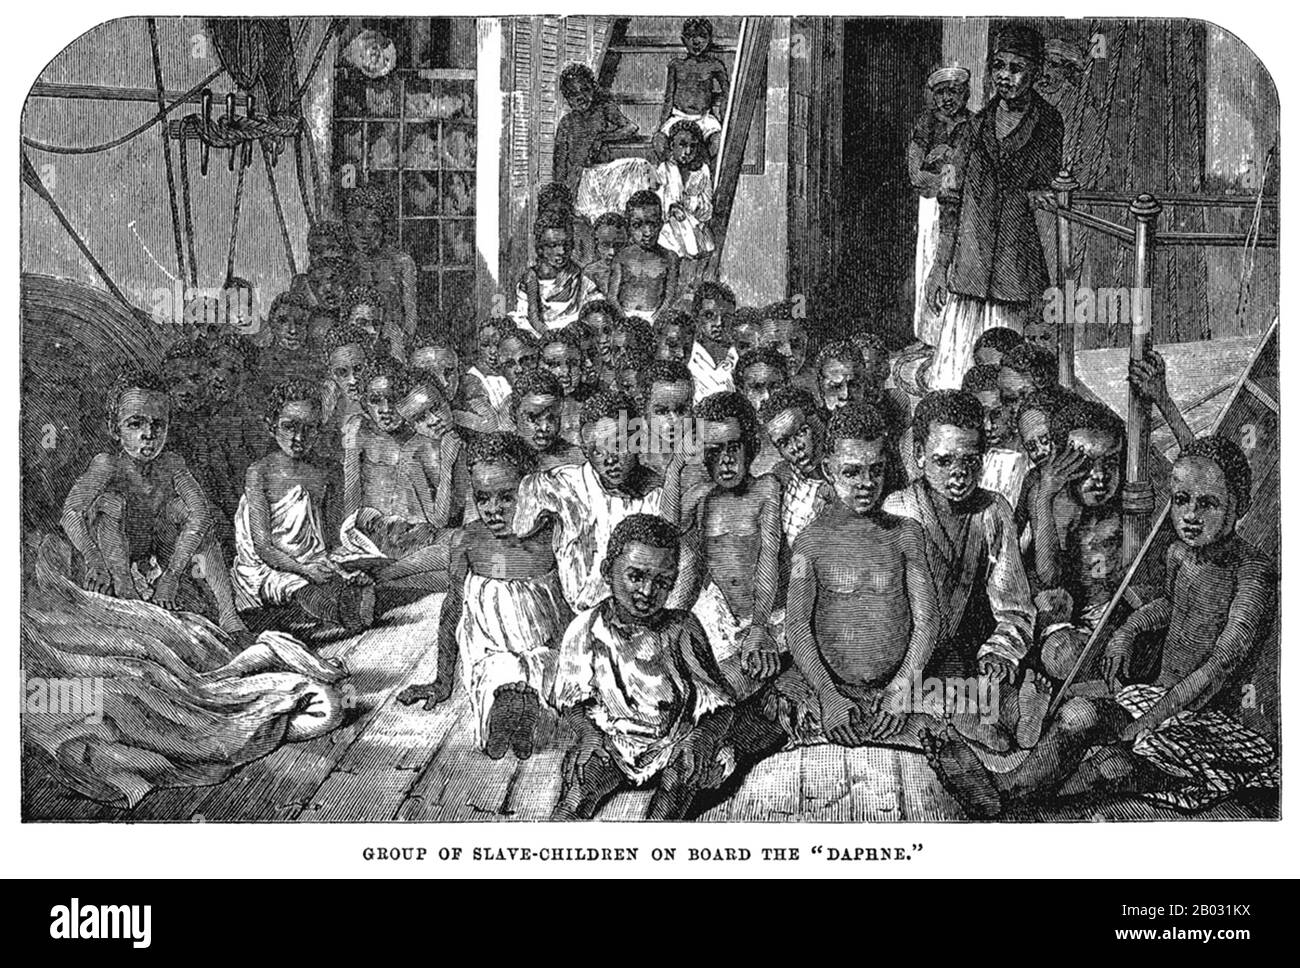 These children are some of the ninety-five who were rescued from slavery by a British ship (the Daphne) patrolling the waters off Zanzibar in 1869.   After Parliament abolished the slave trade, ships of the Royal Navy were assigned to intercept slavers and free the human cargo on board.   While this engraving, based on a photograph by George Sullivan, depicts conditions along Africa's eastern shore, the same situation existed on the Atlantic side. Stock Photo